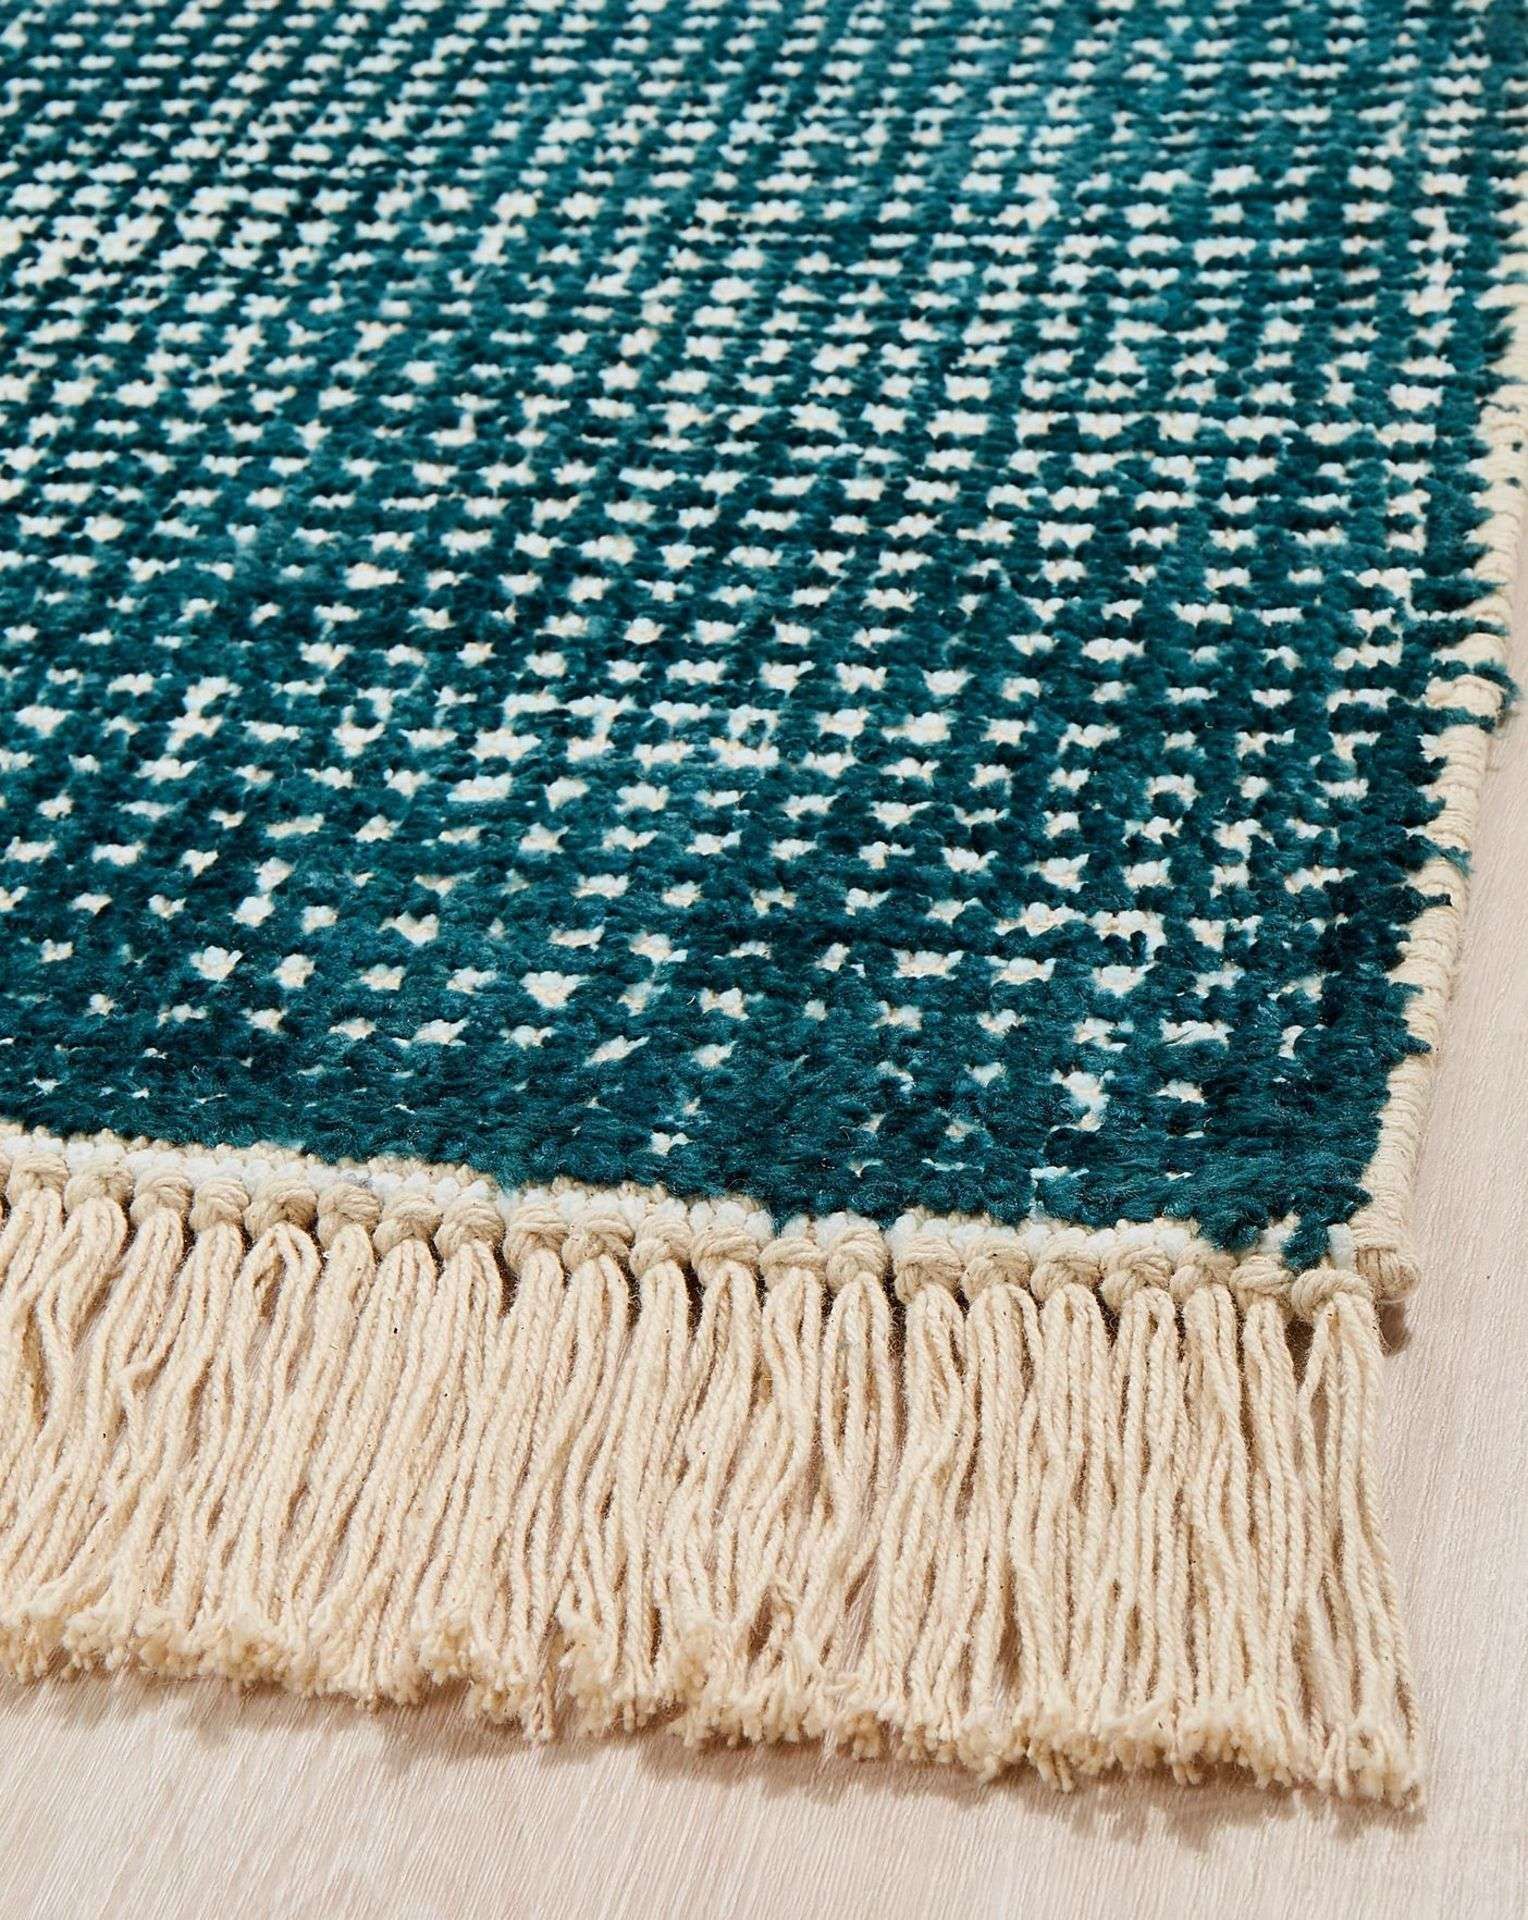 2x BRAND NEW Hallie Woven Fringe Rug 80CM X 150CM. TEAL. RRP £69 EACH. A woven design that is soft - Image 2 of 3